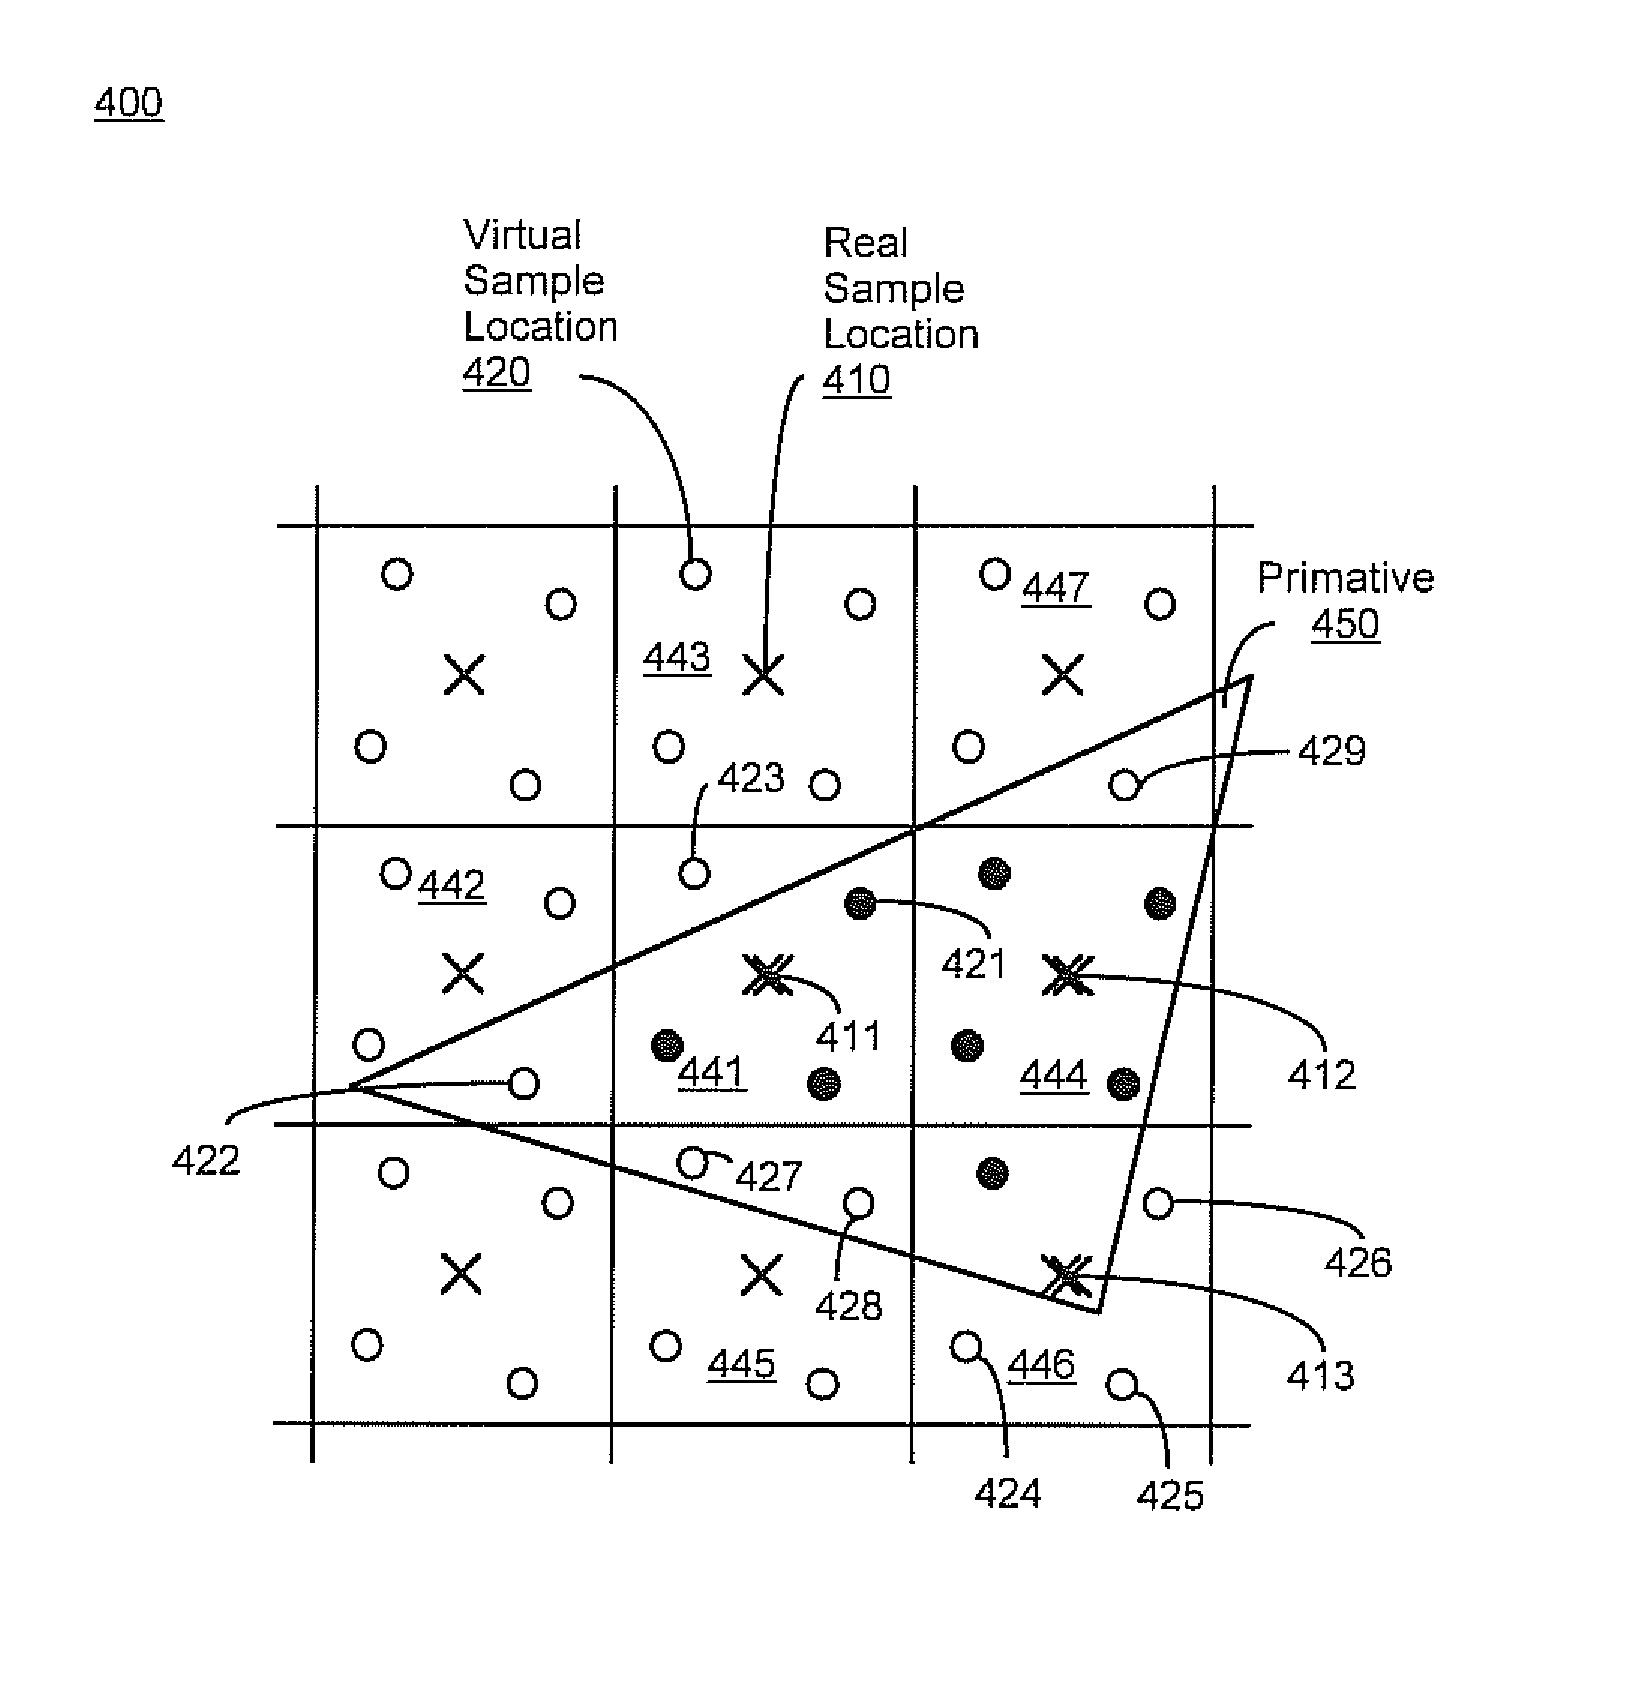 Selecting real sample locations for ownership of virtual sample locations in a computer graphics system